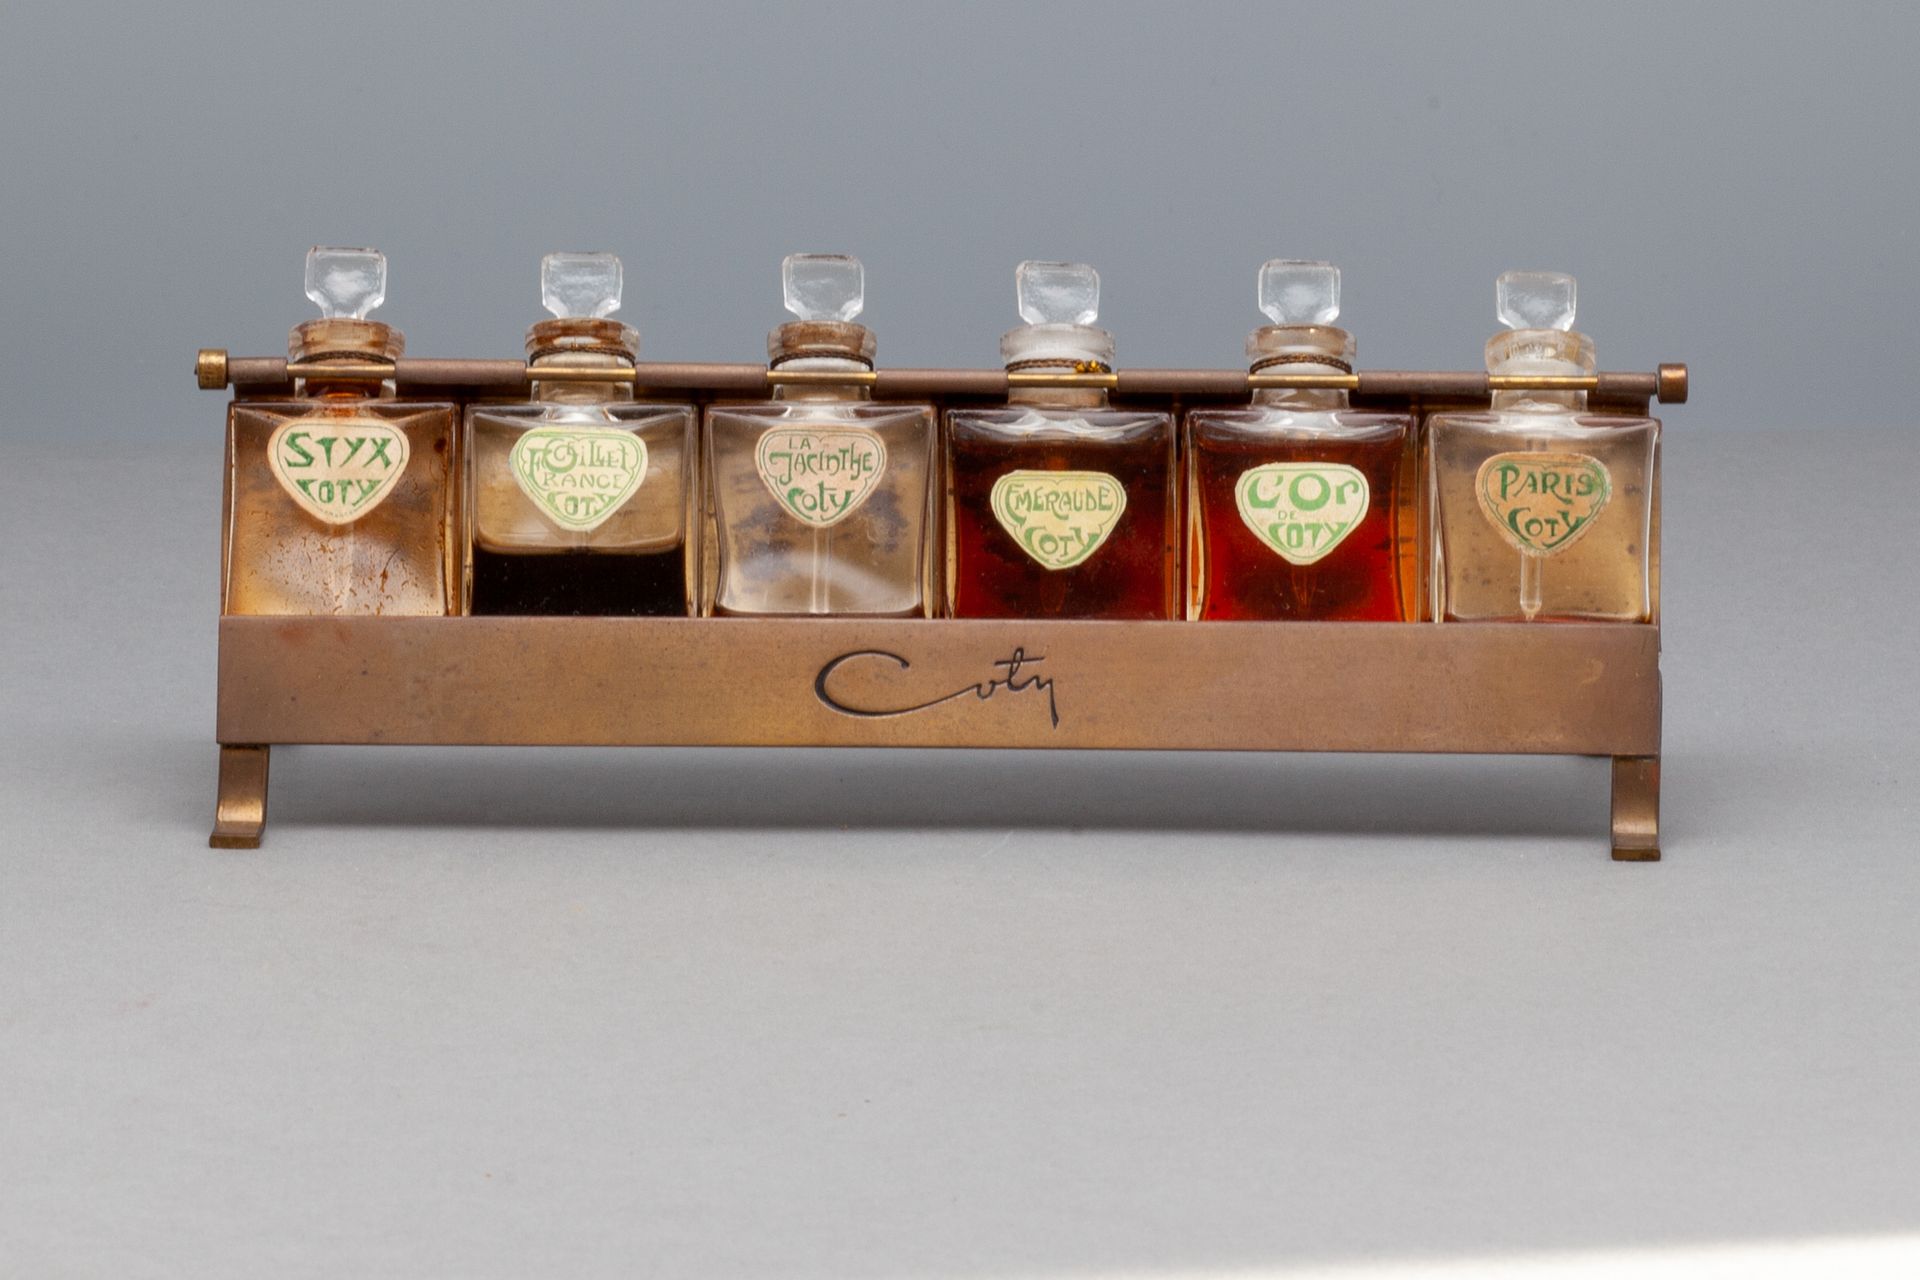 COTY Metal tester display containing six bottles of the House COTY: "Styx", "Œil&hellip;